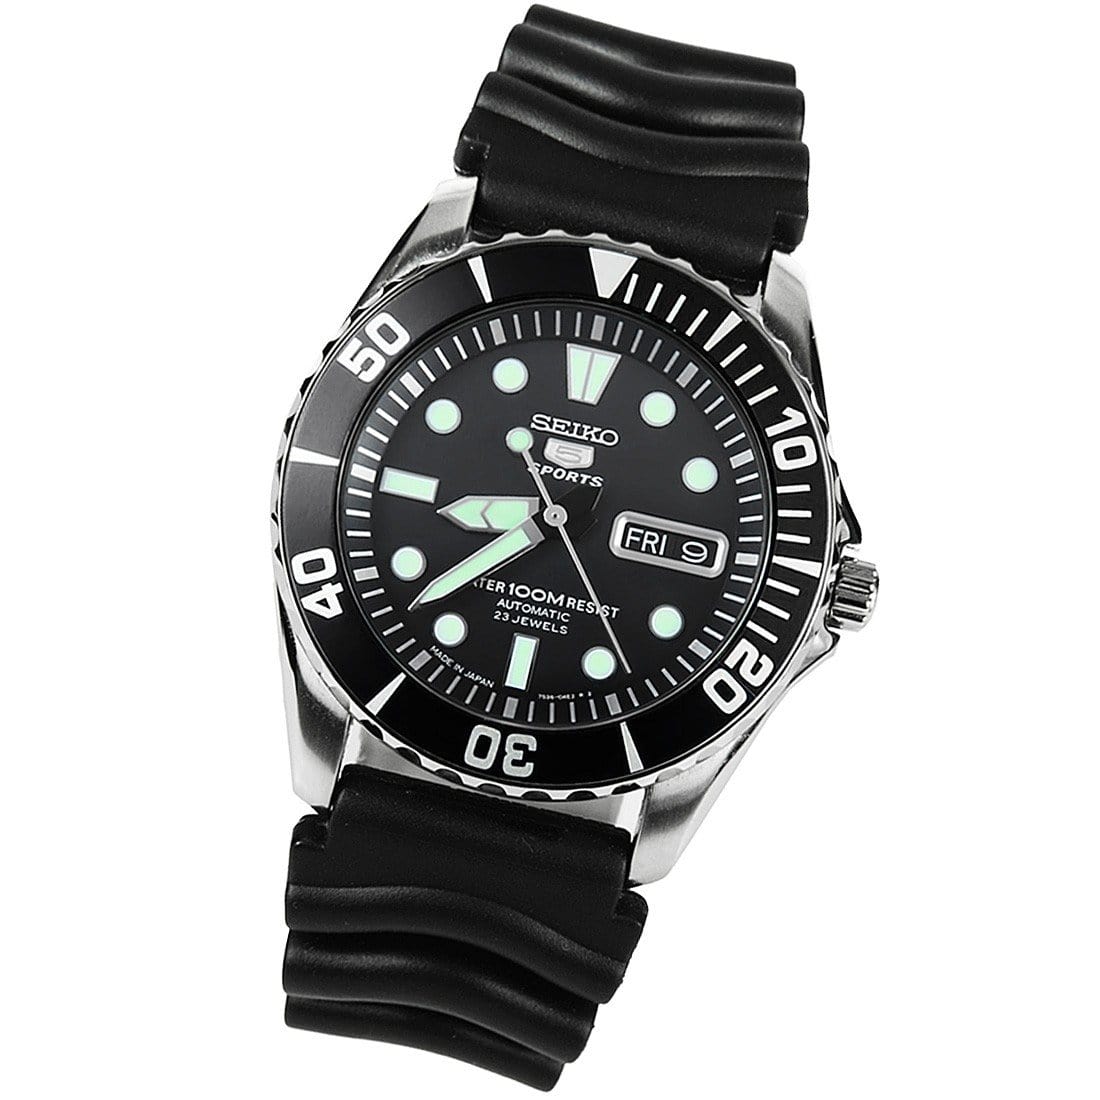 Seiko 5 Sports Diving Watch SNZF17J2 SNZF17 with EXTRA BRACELET